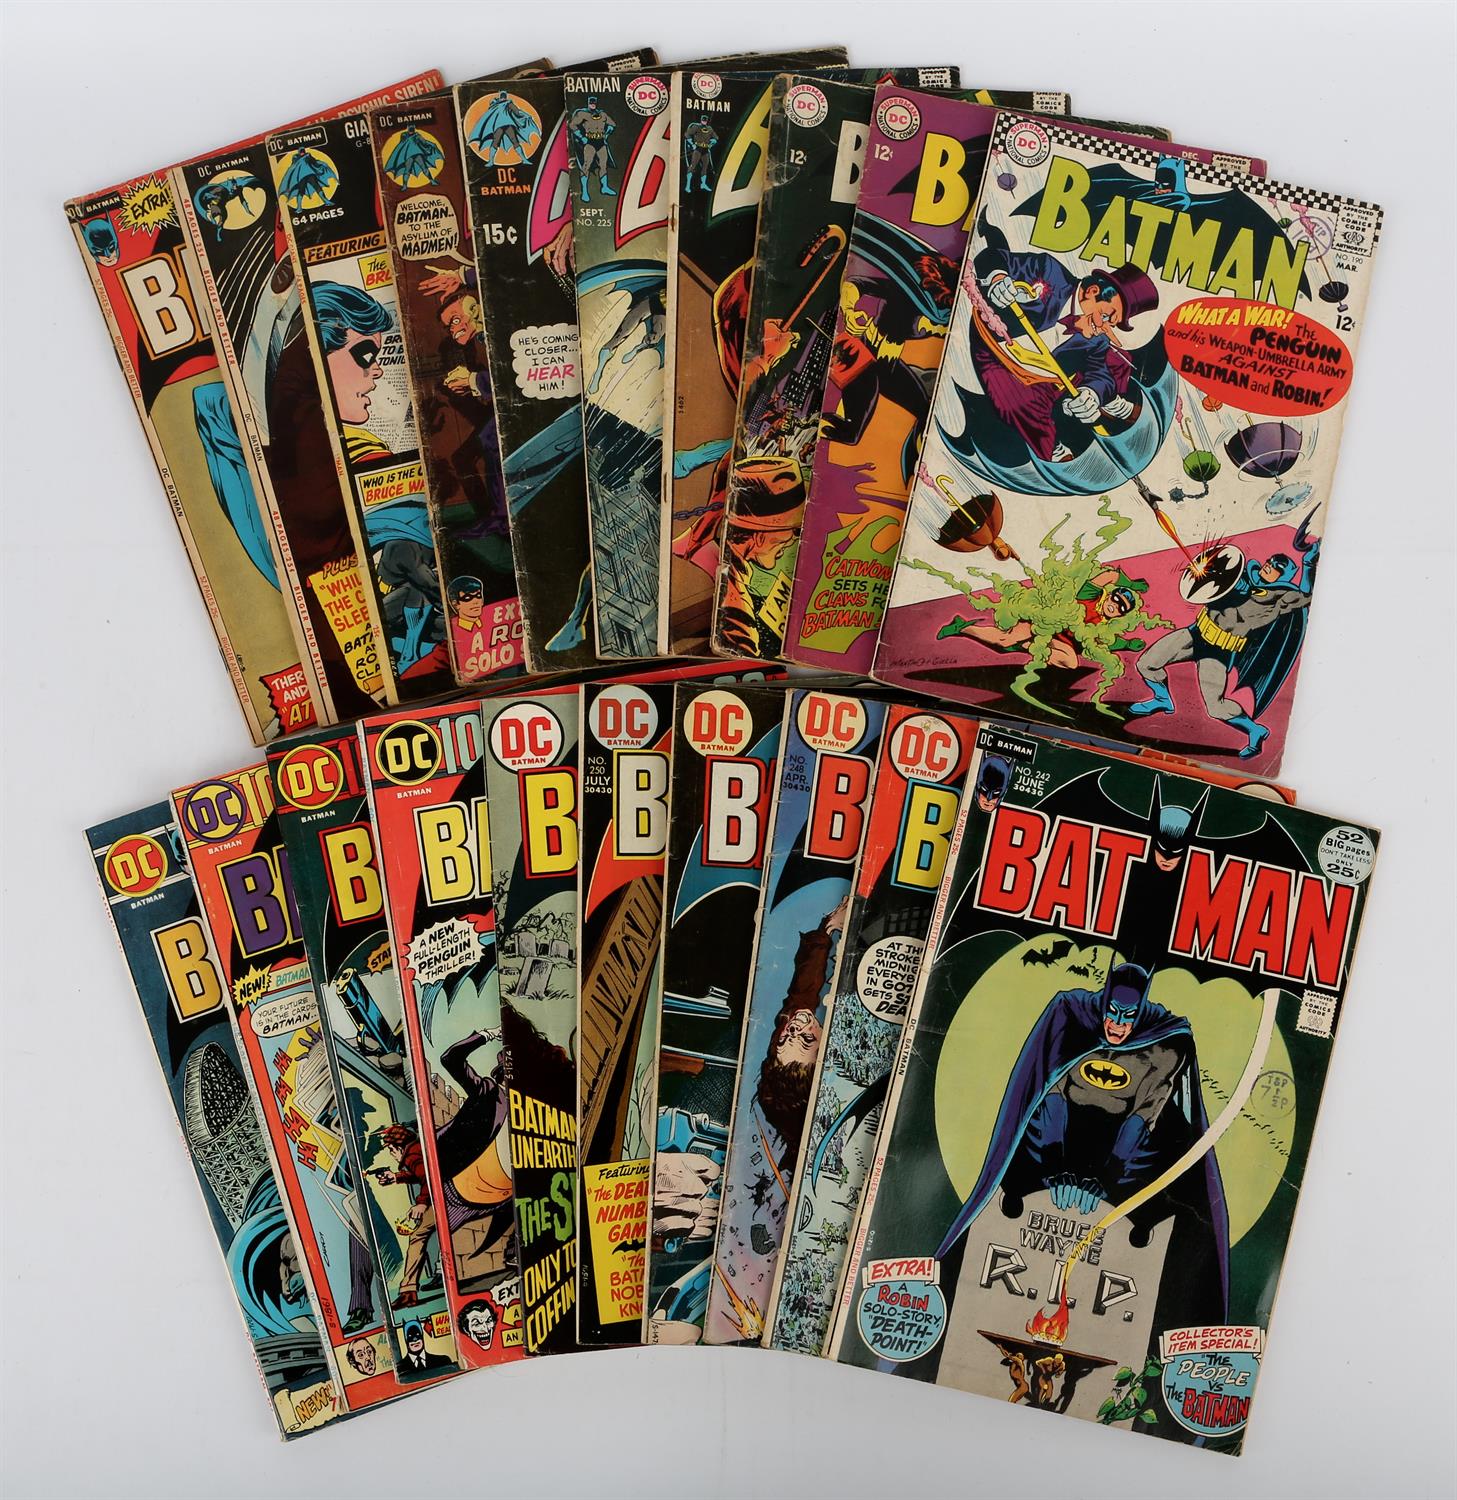 DC Comics: A group of 20 Batman comics featuring notable issues (1967 onwards). This lot